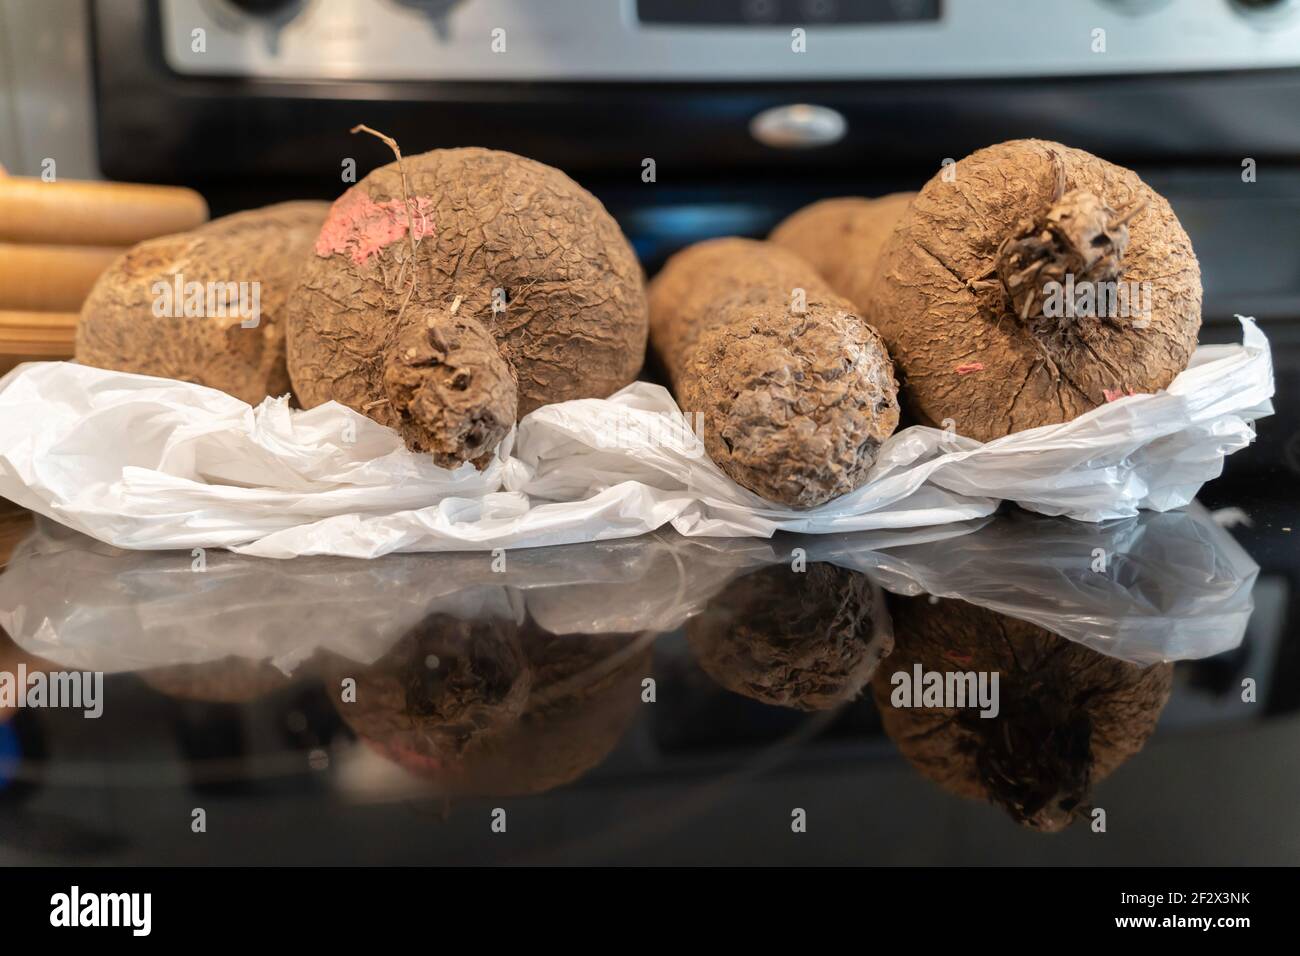 Pile of Nigerian African Yam tubers in a kitchen Stock Photo